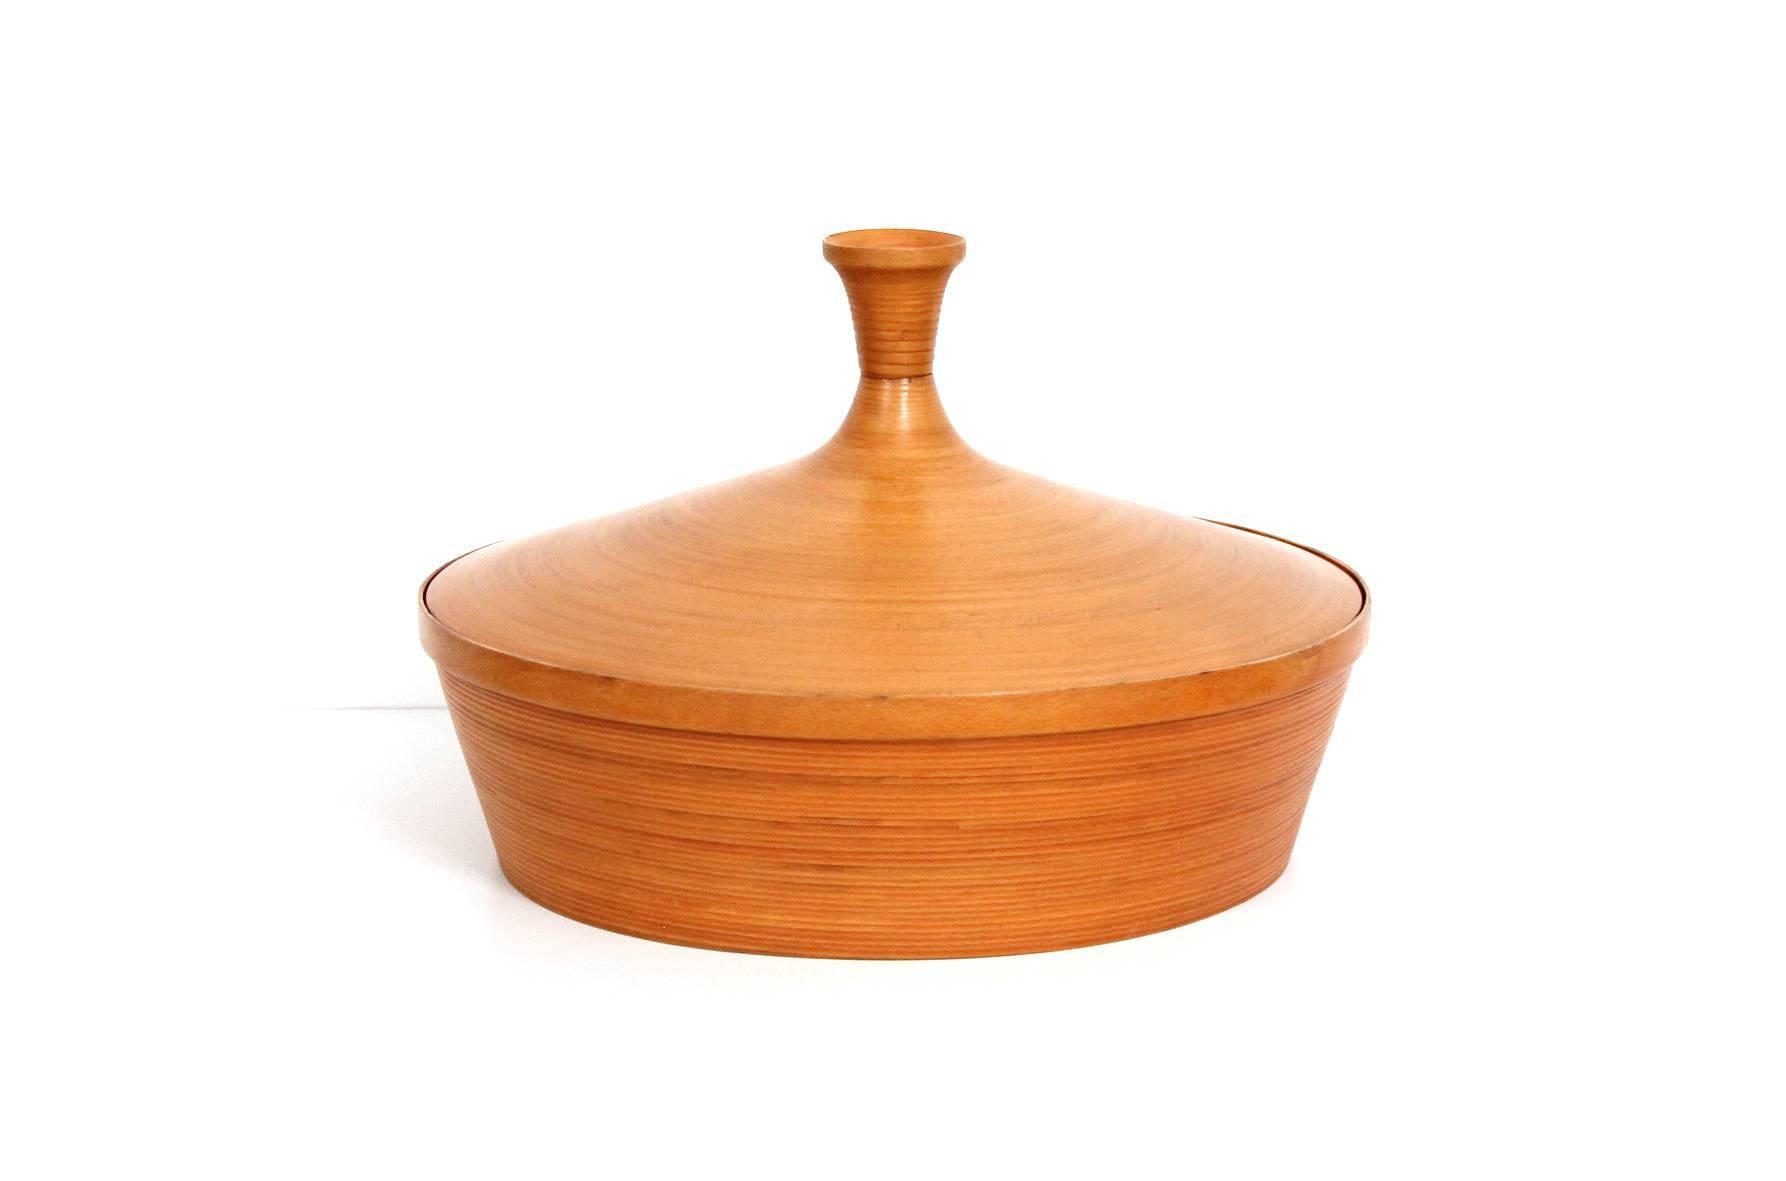 Oversized lidded vessel or box made from meticulously laminated birch. We believe this stunning piece to be of Scandinavian origin, possibly produced in Finland. Perfect for storing small objects, remotes, or periodicals.

____

We're offering our